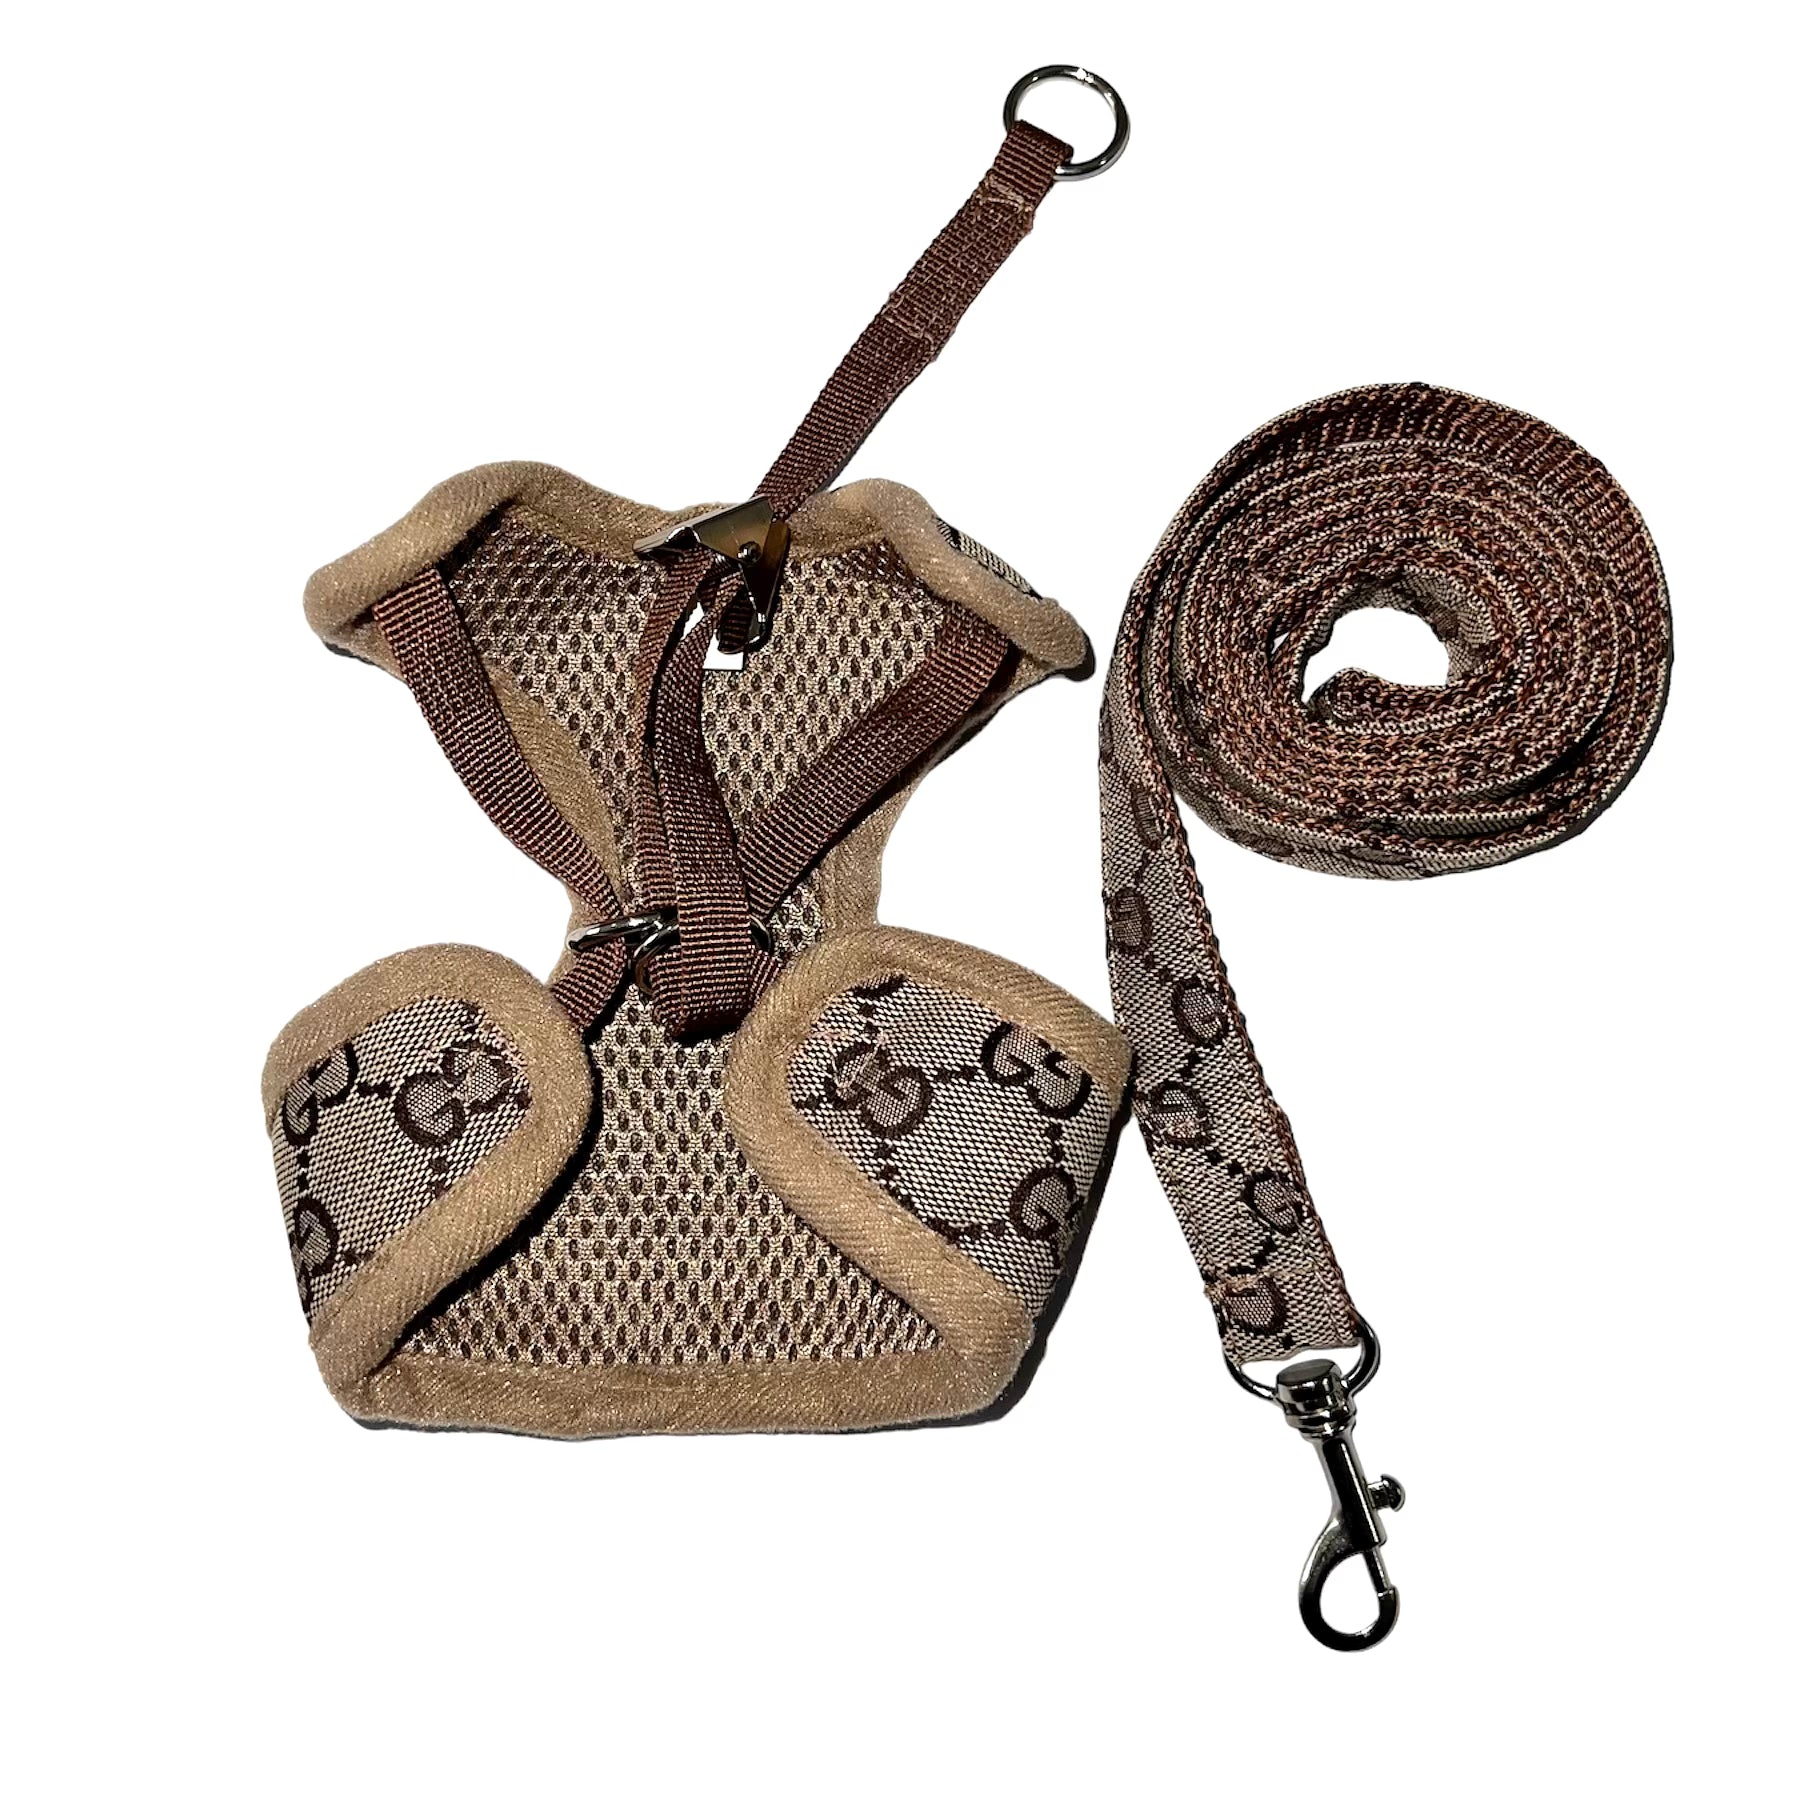 Paw Vuitton Denim Leash and Harness Set – Furs and paws